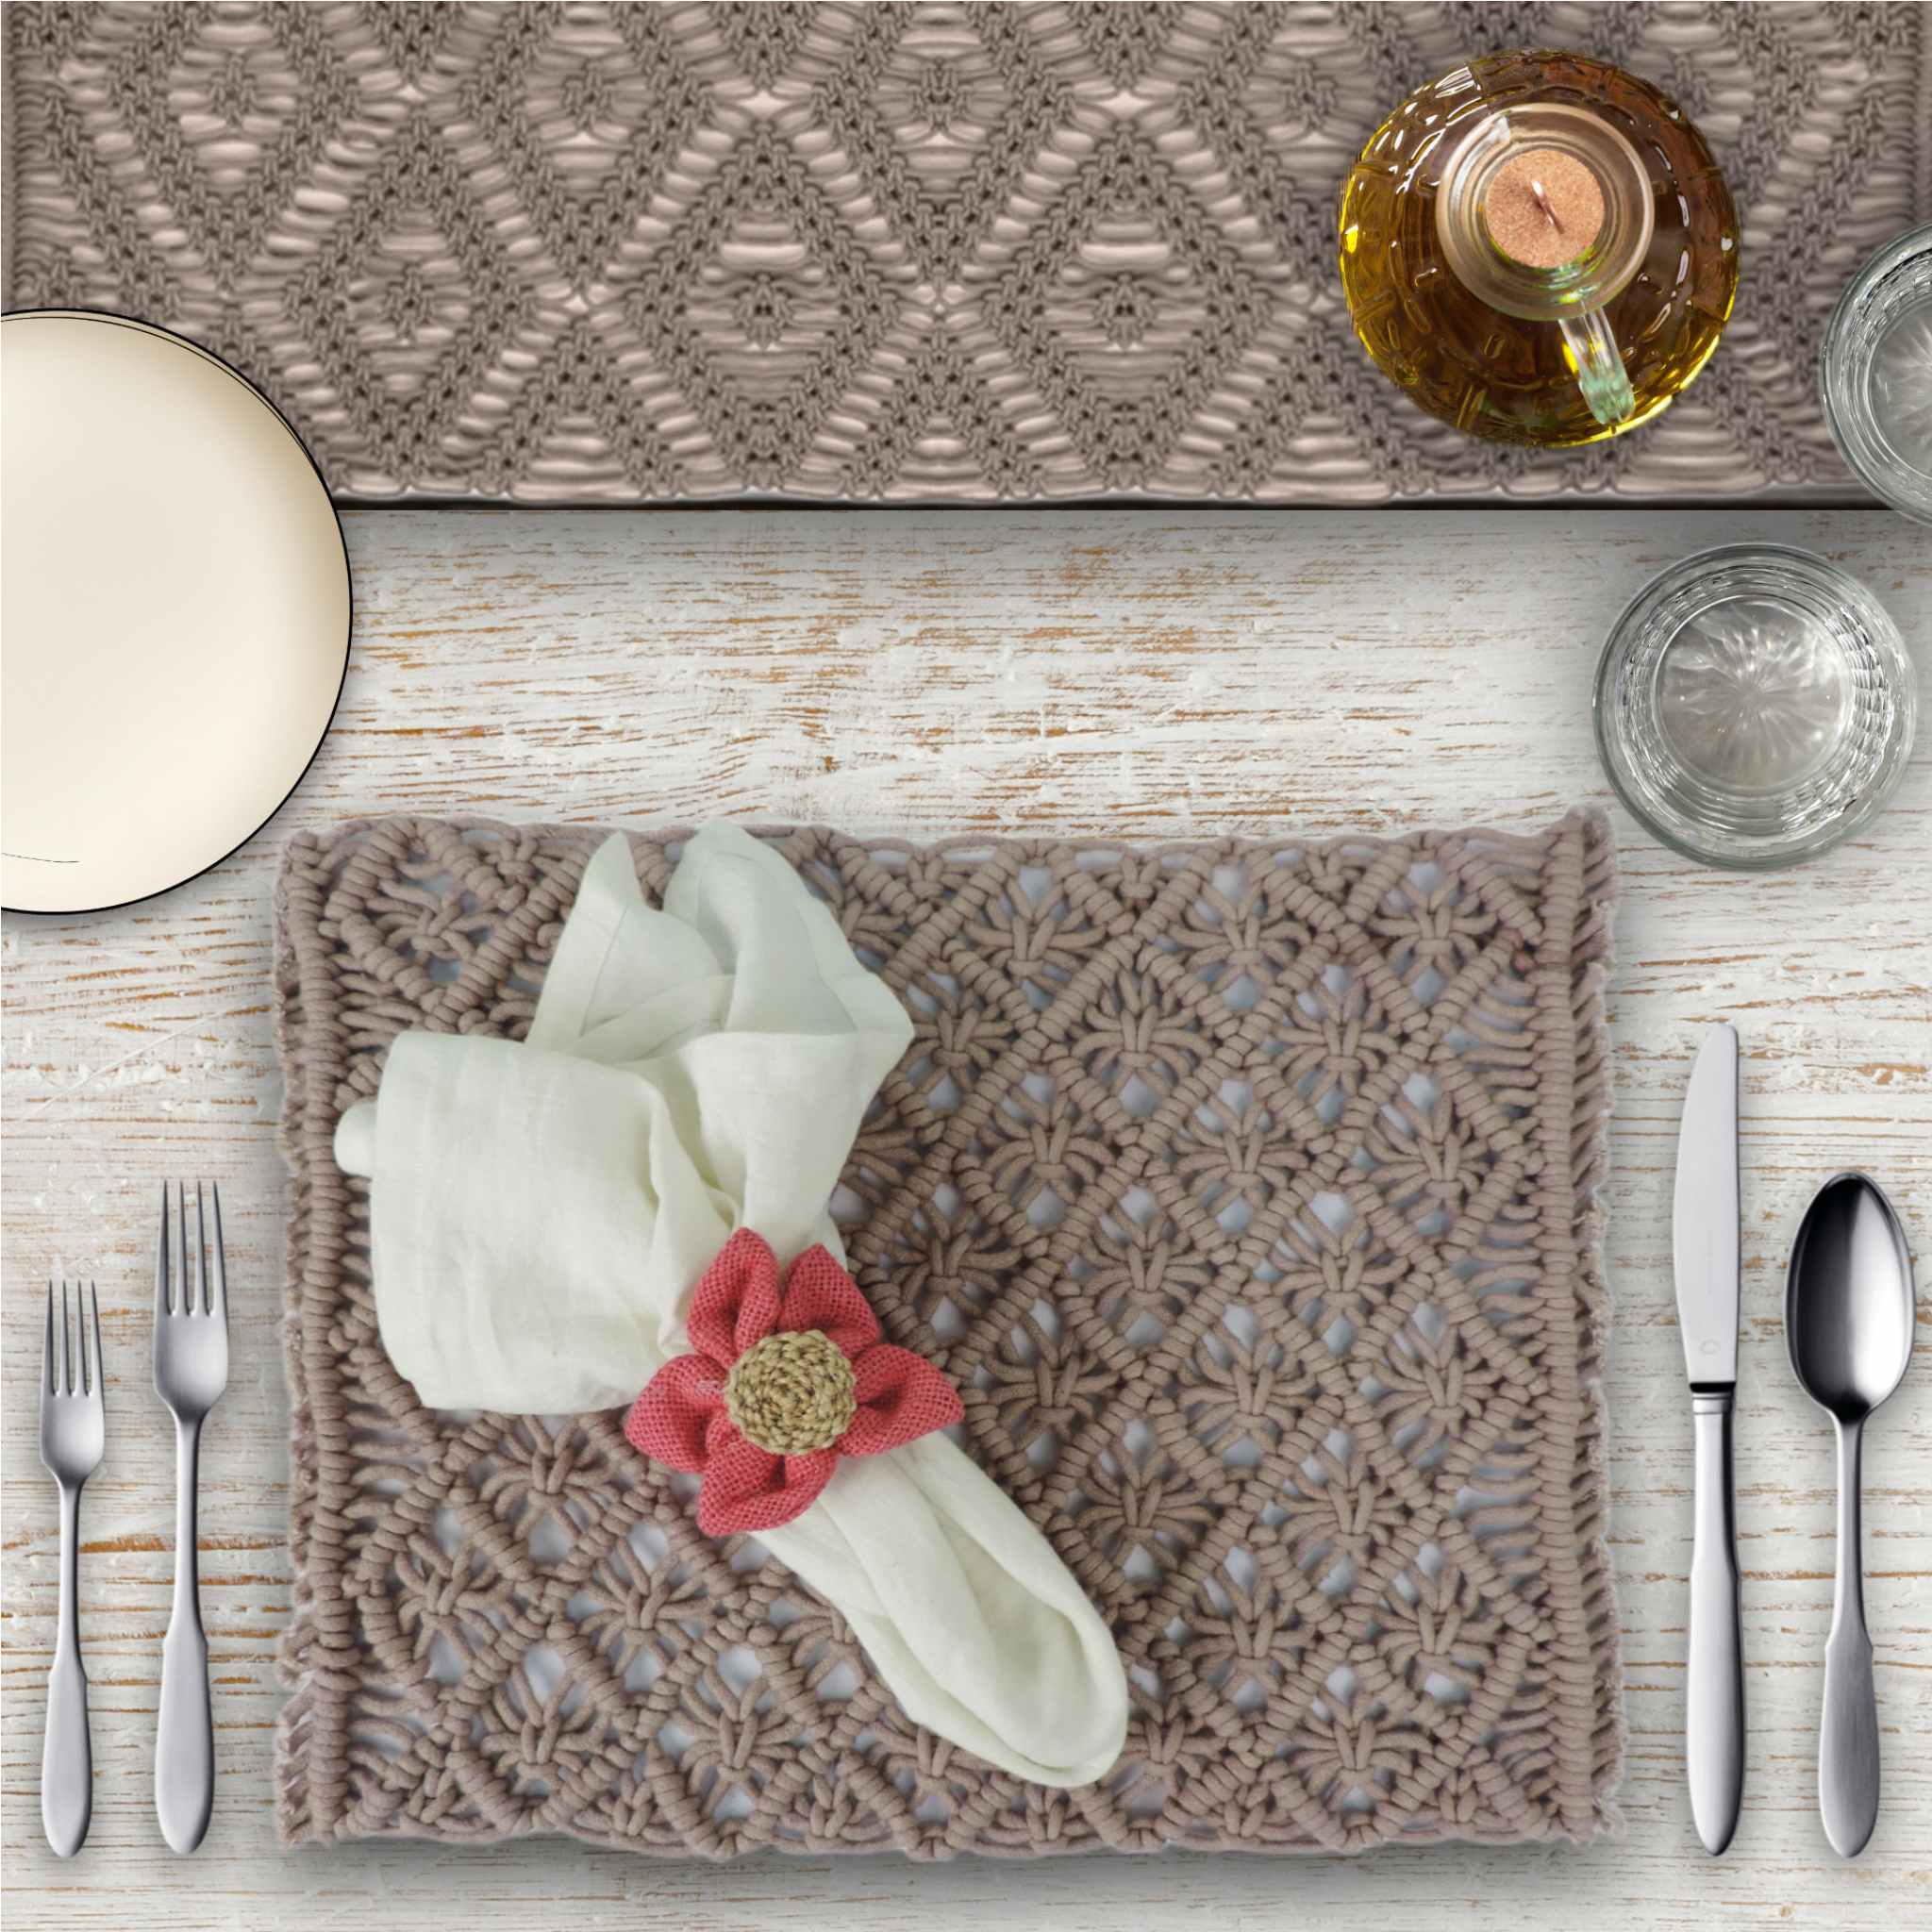 Macramé Table Setting for 4 - Placemats, Napkin Rings & Table Runner in Beige